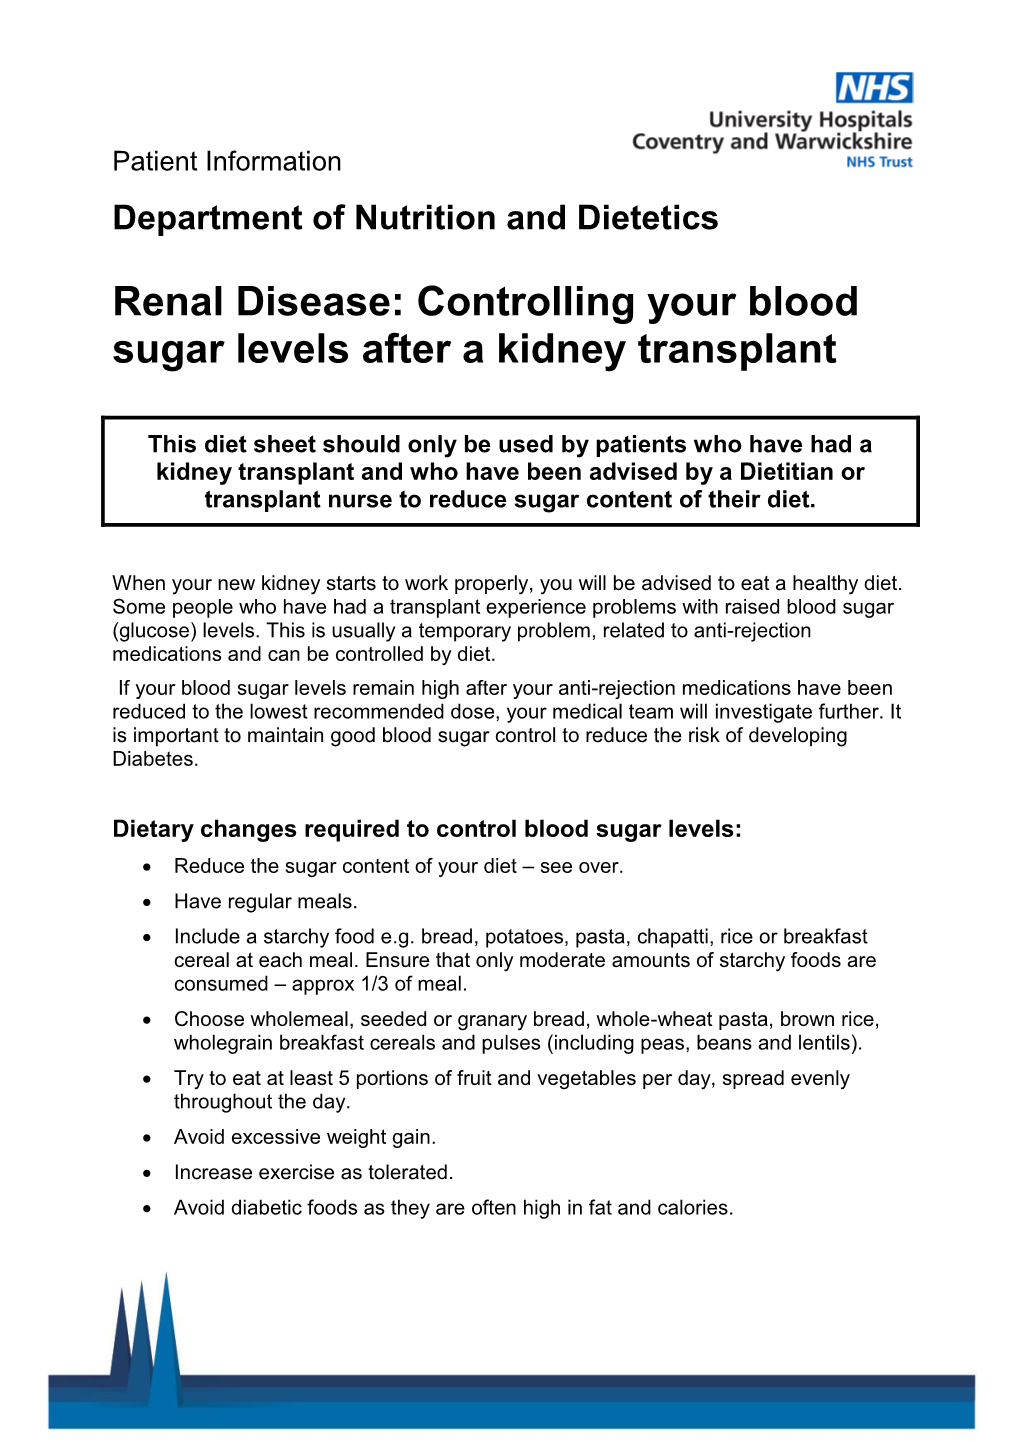 Controlling Your Blood Sugar Levels After a Kidney Transplant